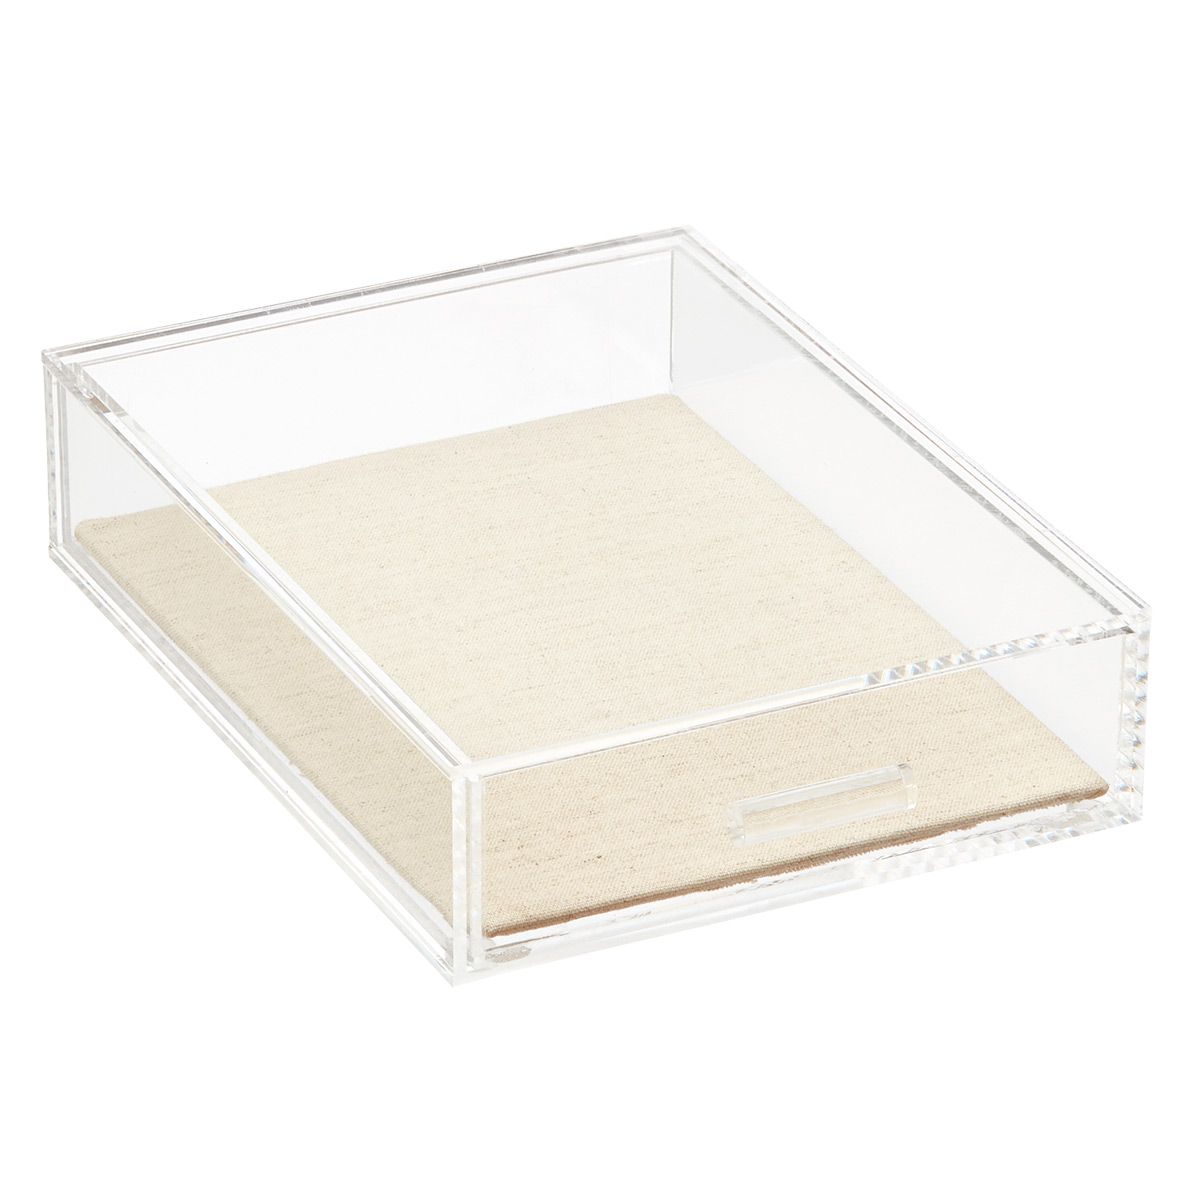 Narrow Acrylic Jewelry Drawer | The Container Store